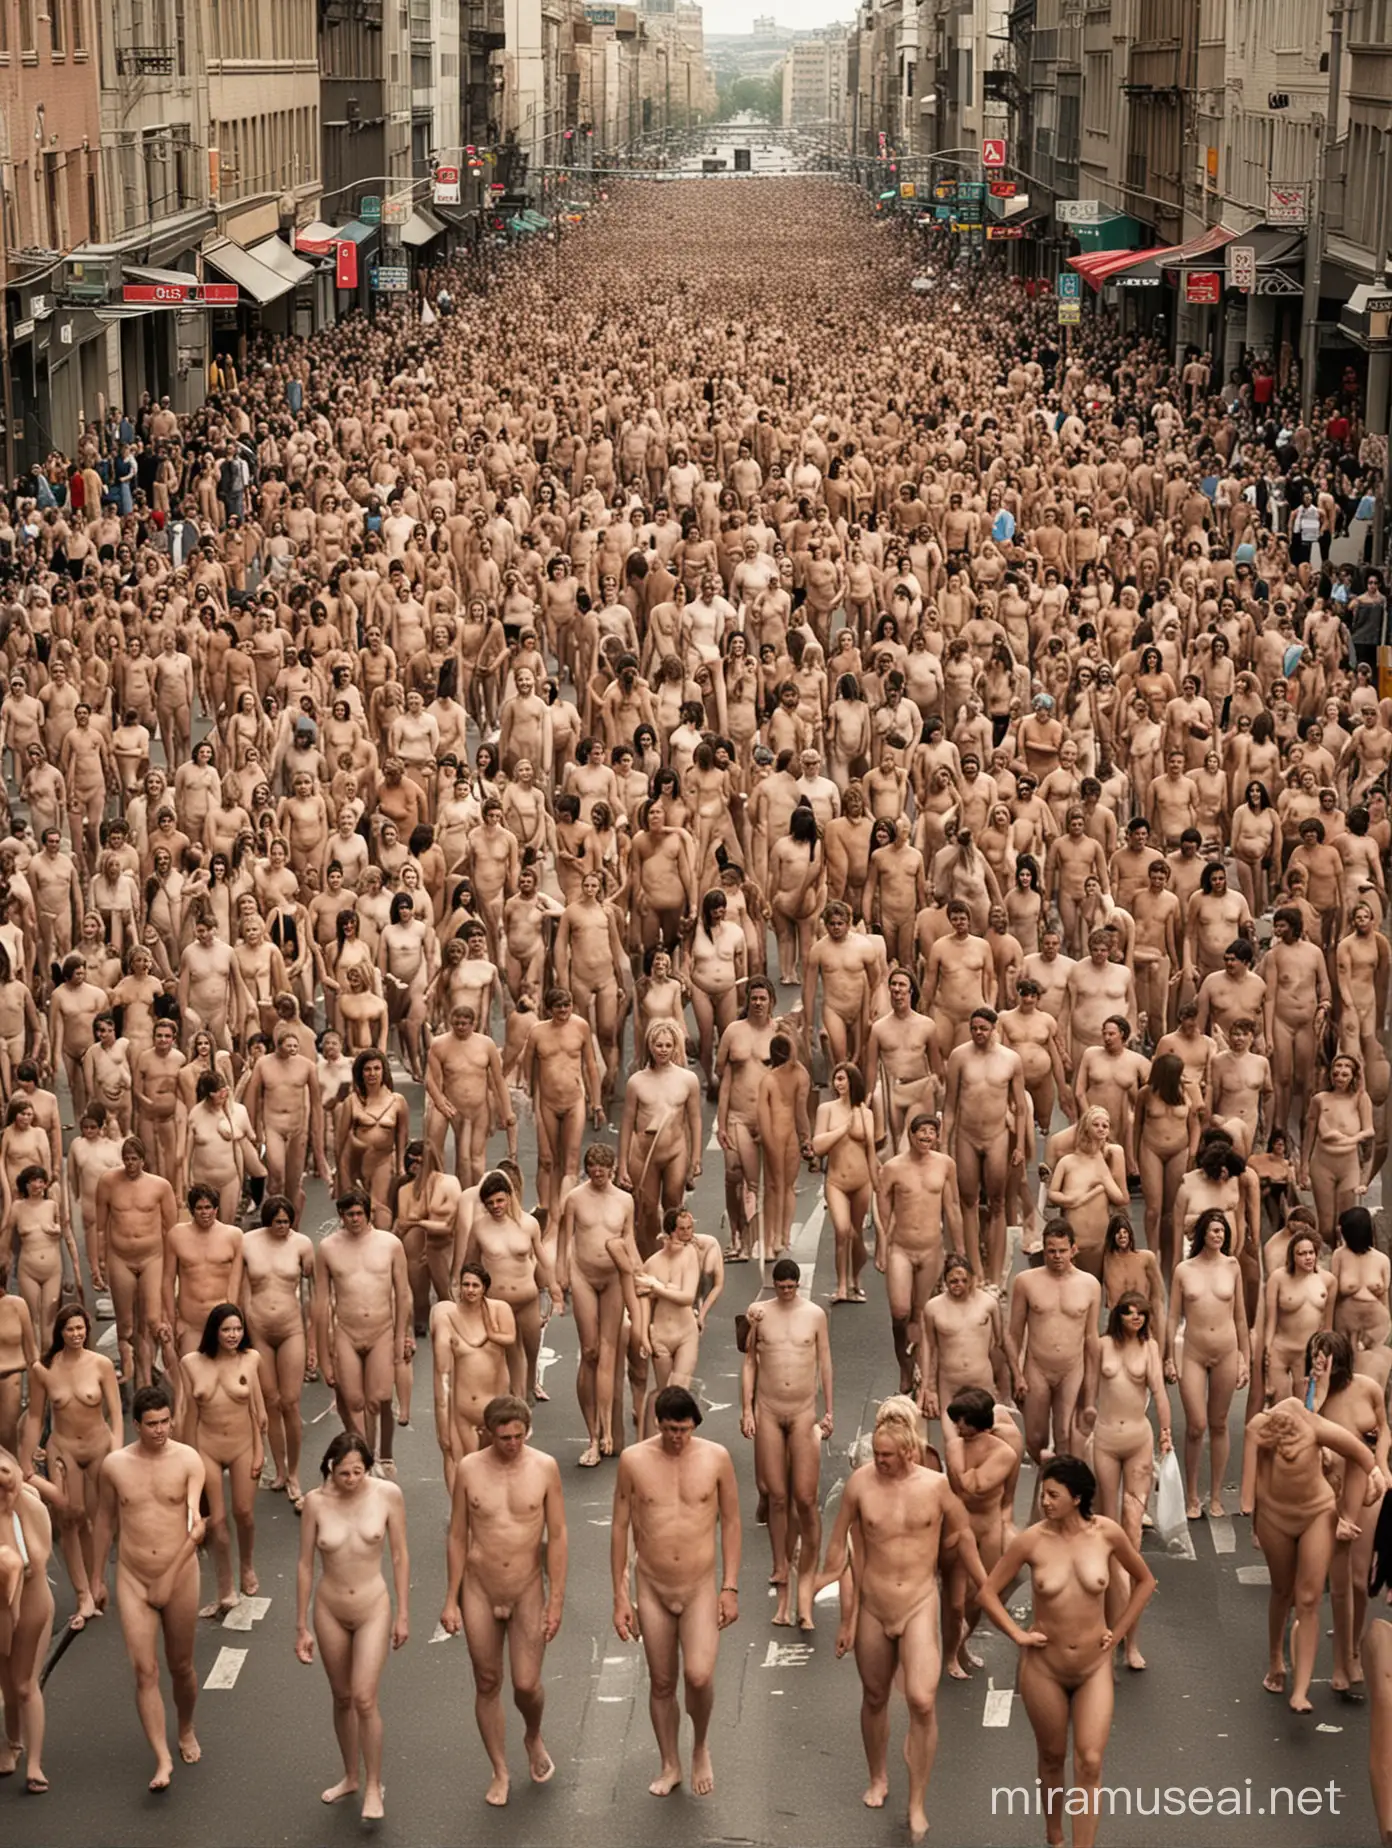 City full of naked people 